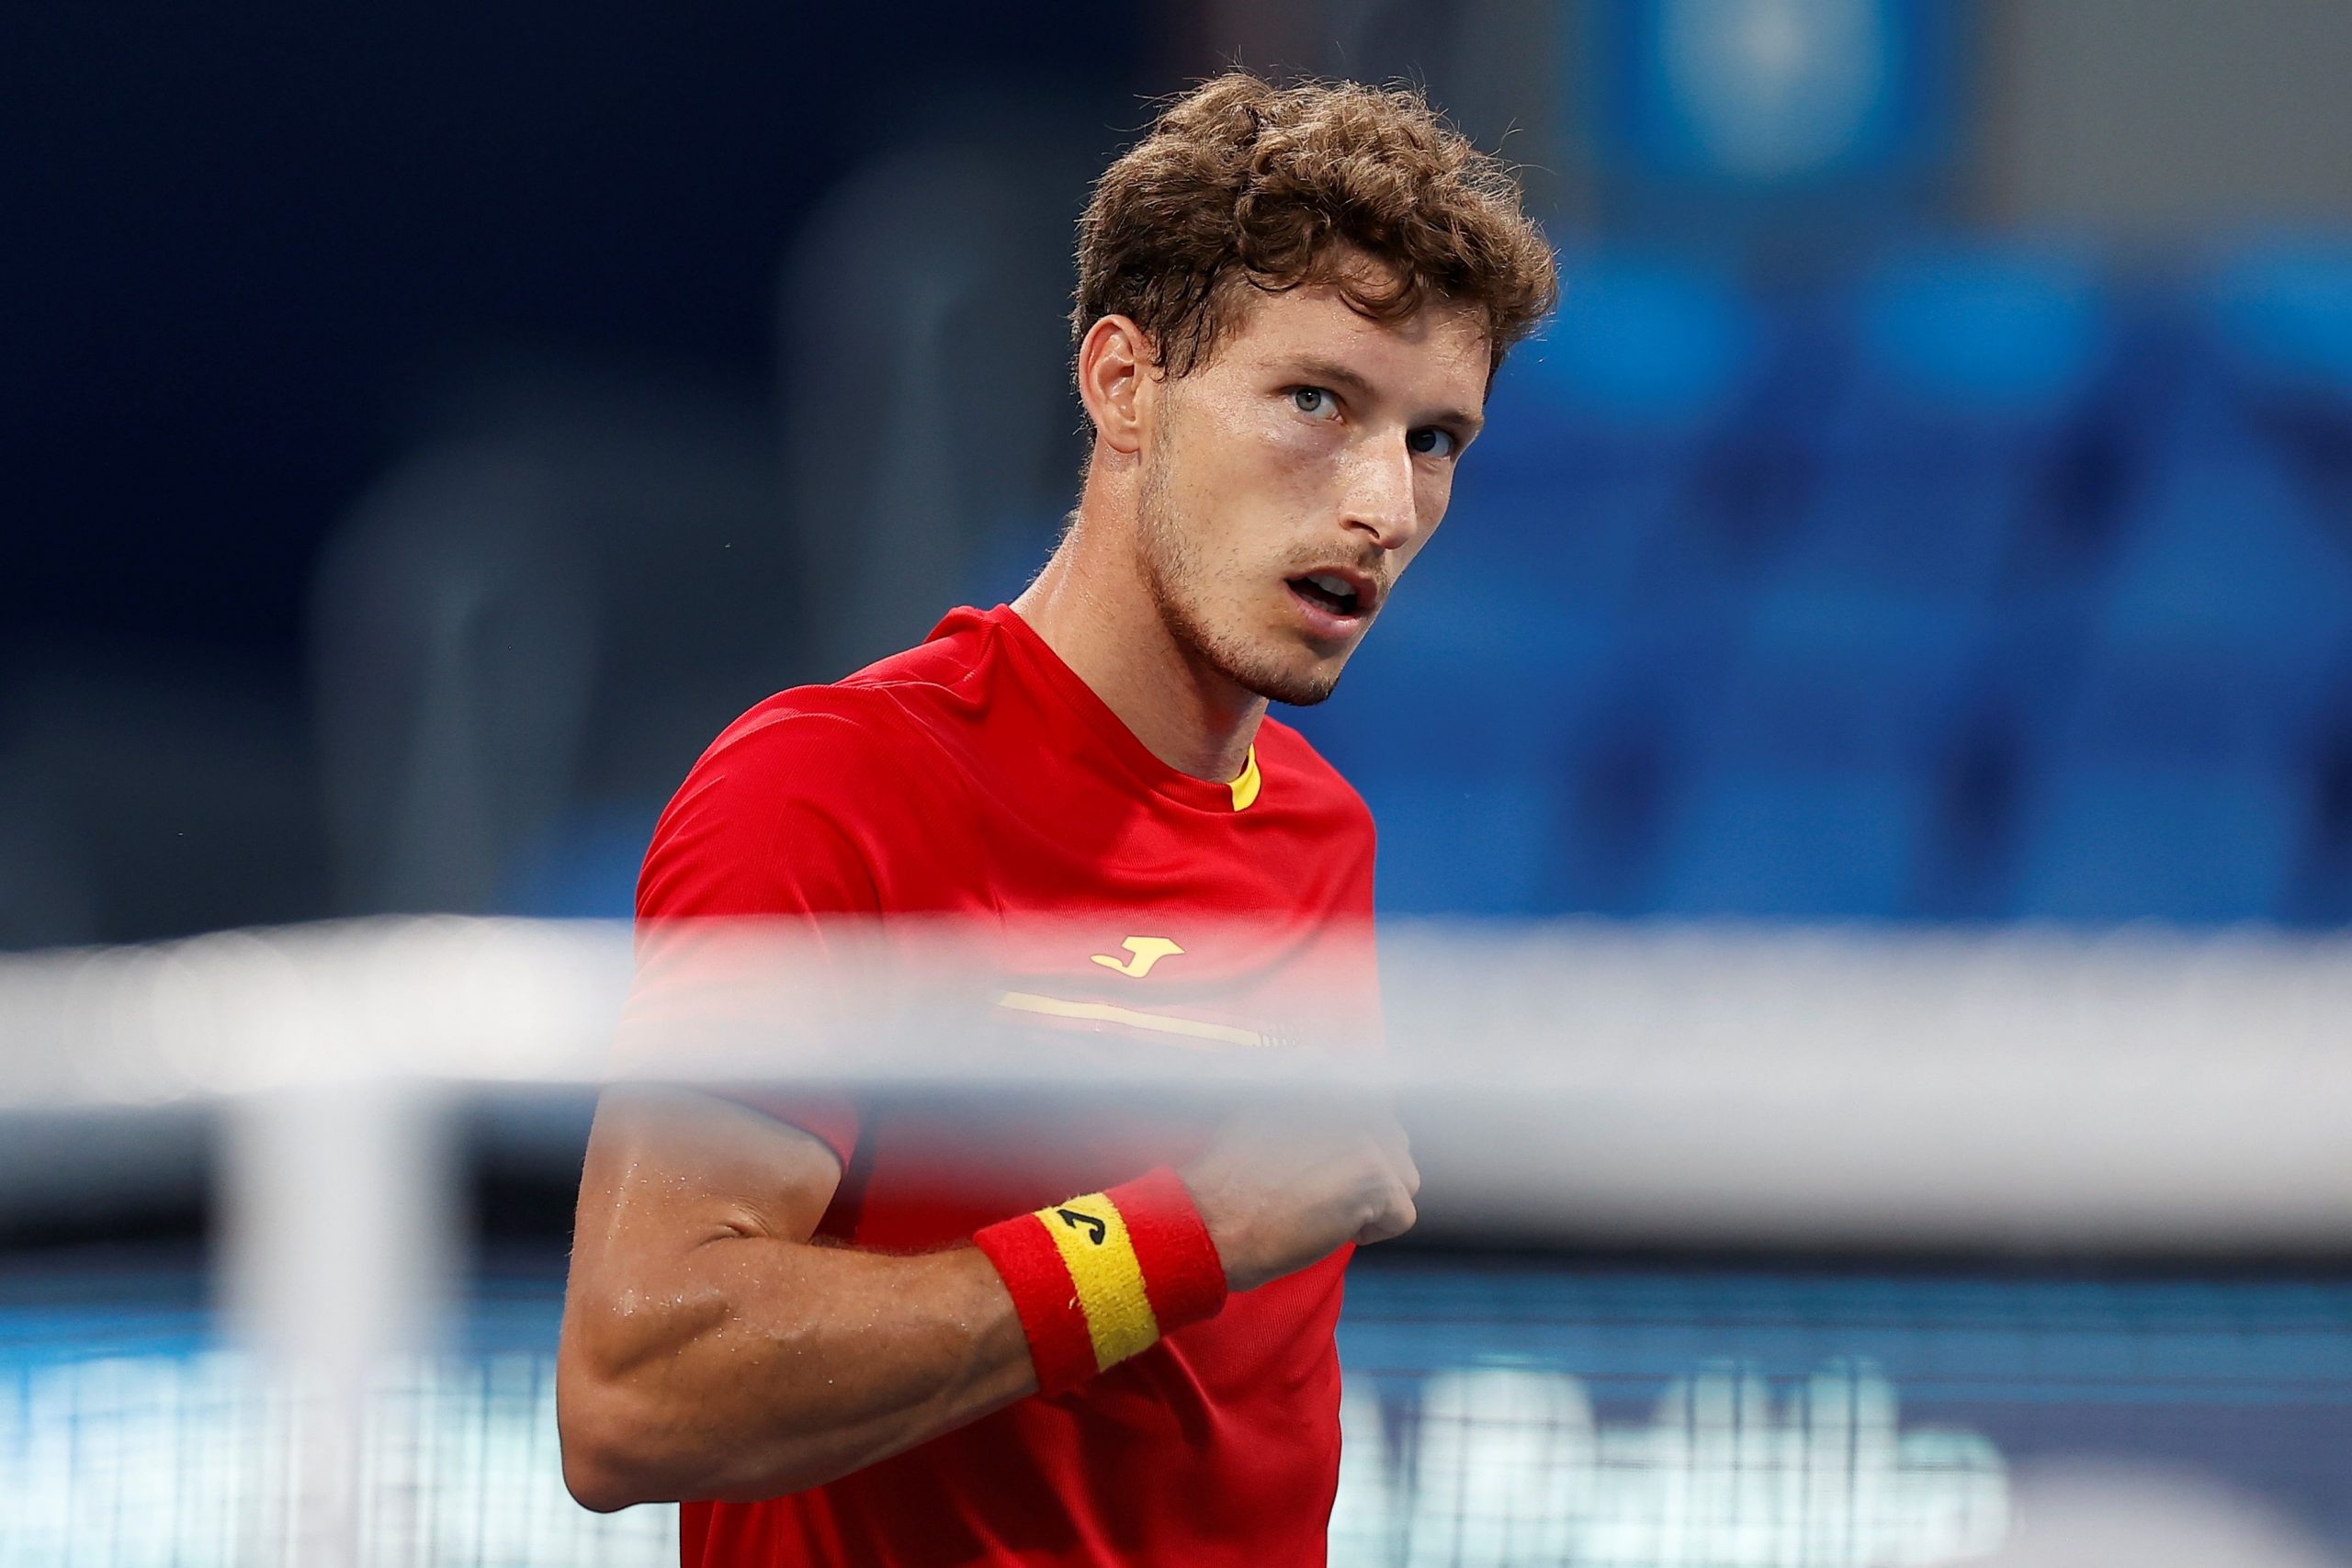 Pablo Carreno Busta Ousts Medvedev To Guarantee Medal Match At Olympics - U...